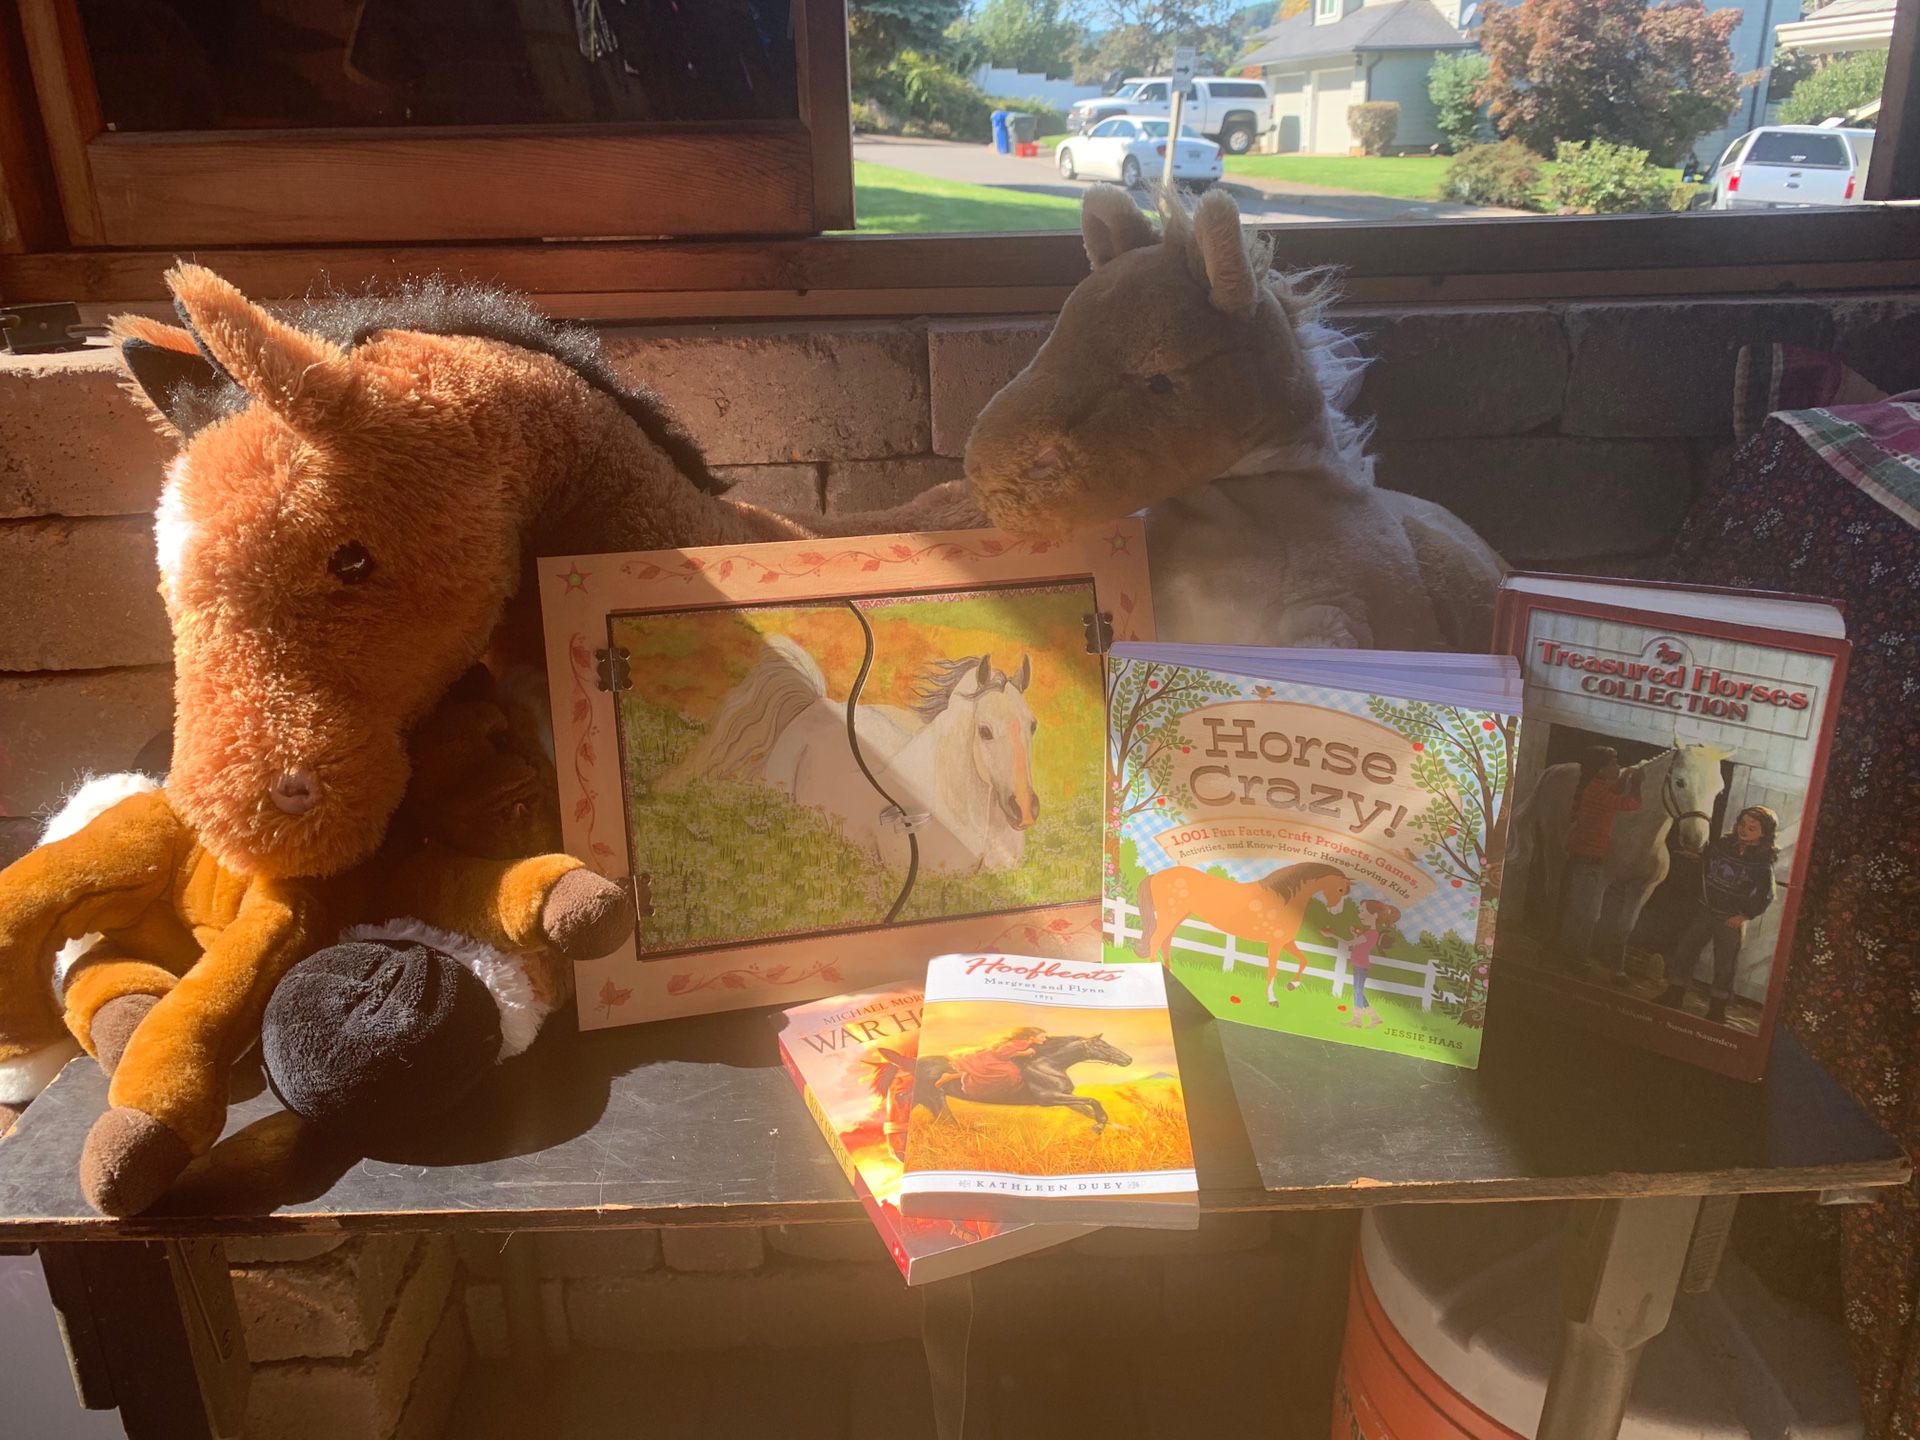 Horse stuffed animal and book collection